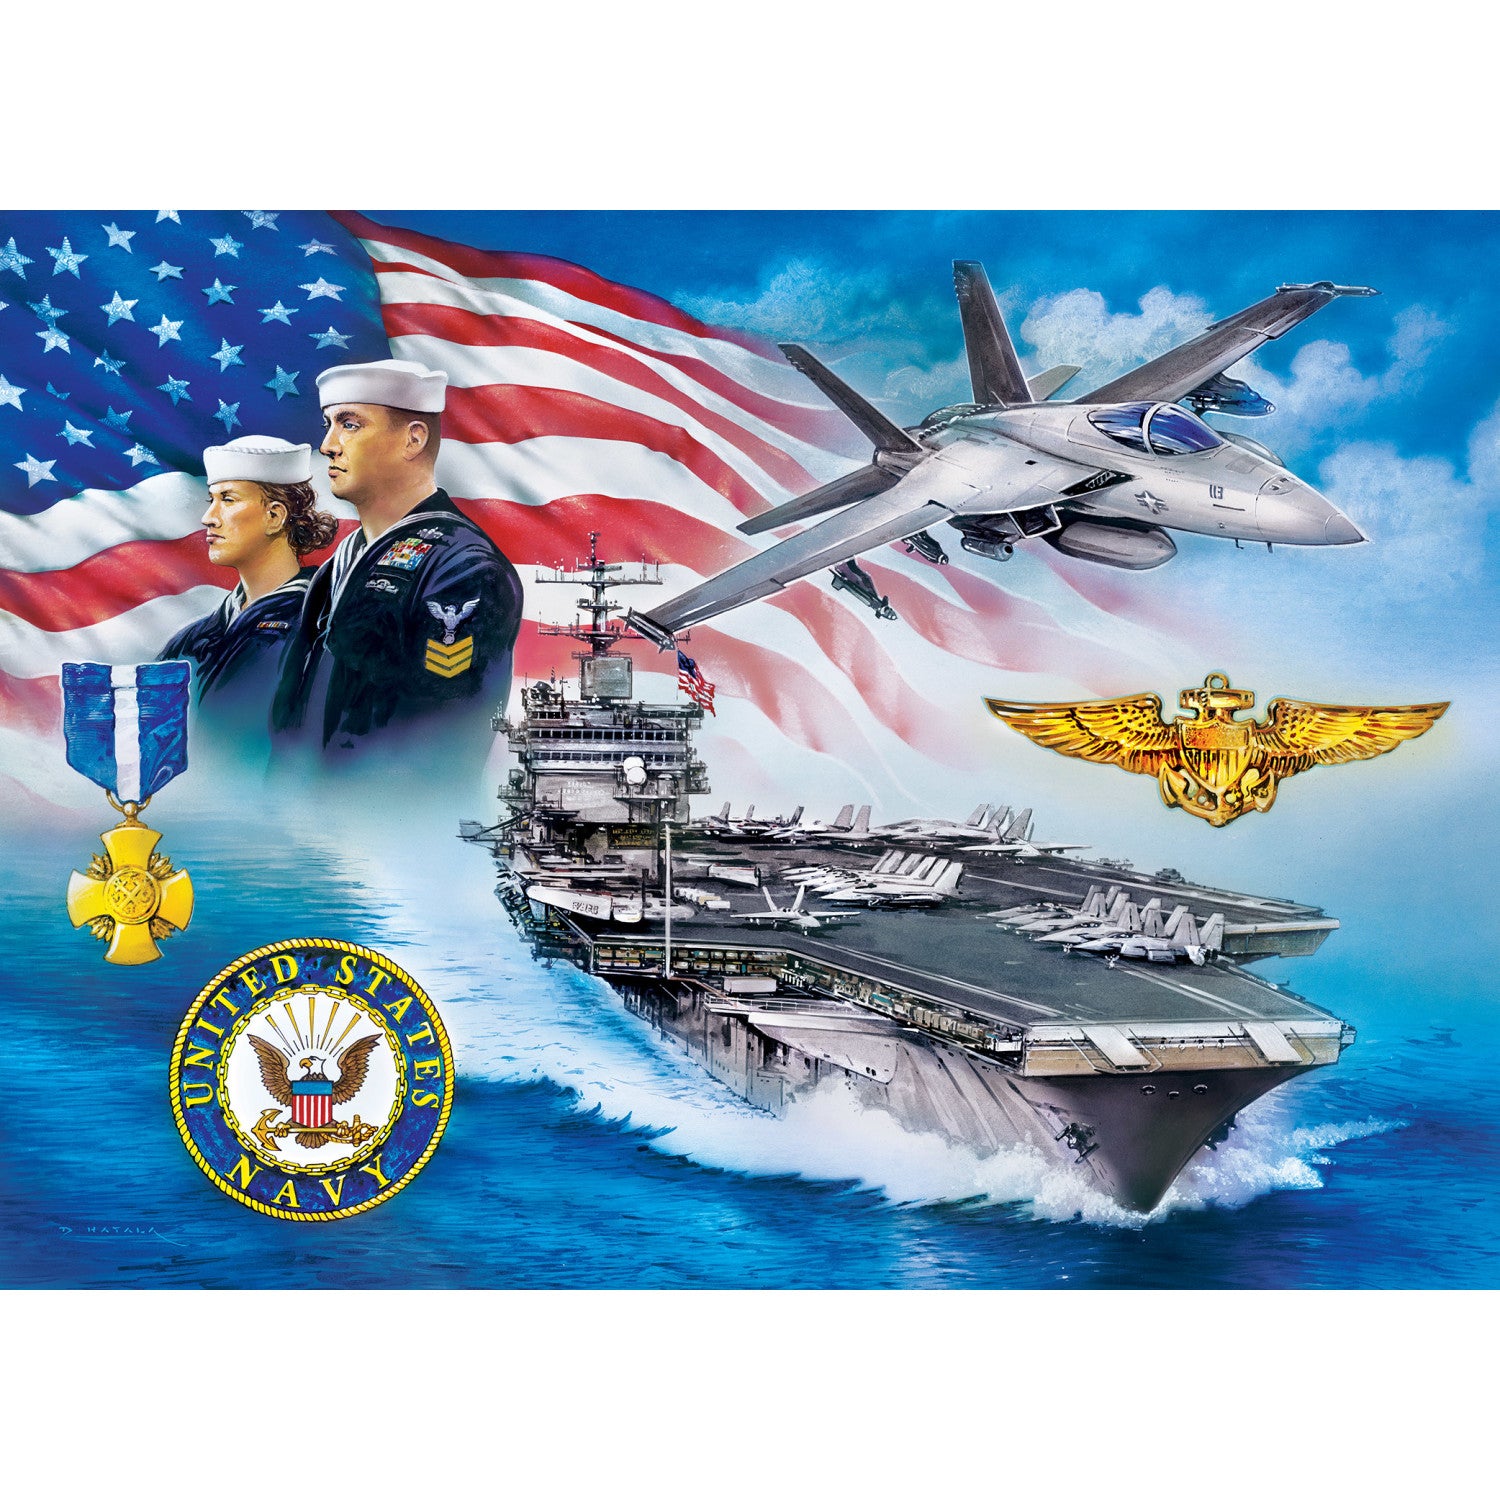 US Navy - Anchors Aweigh 1000 Piece Puzzle